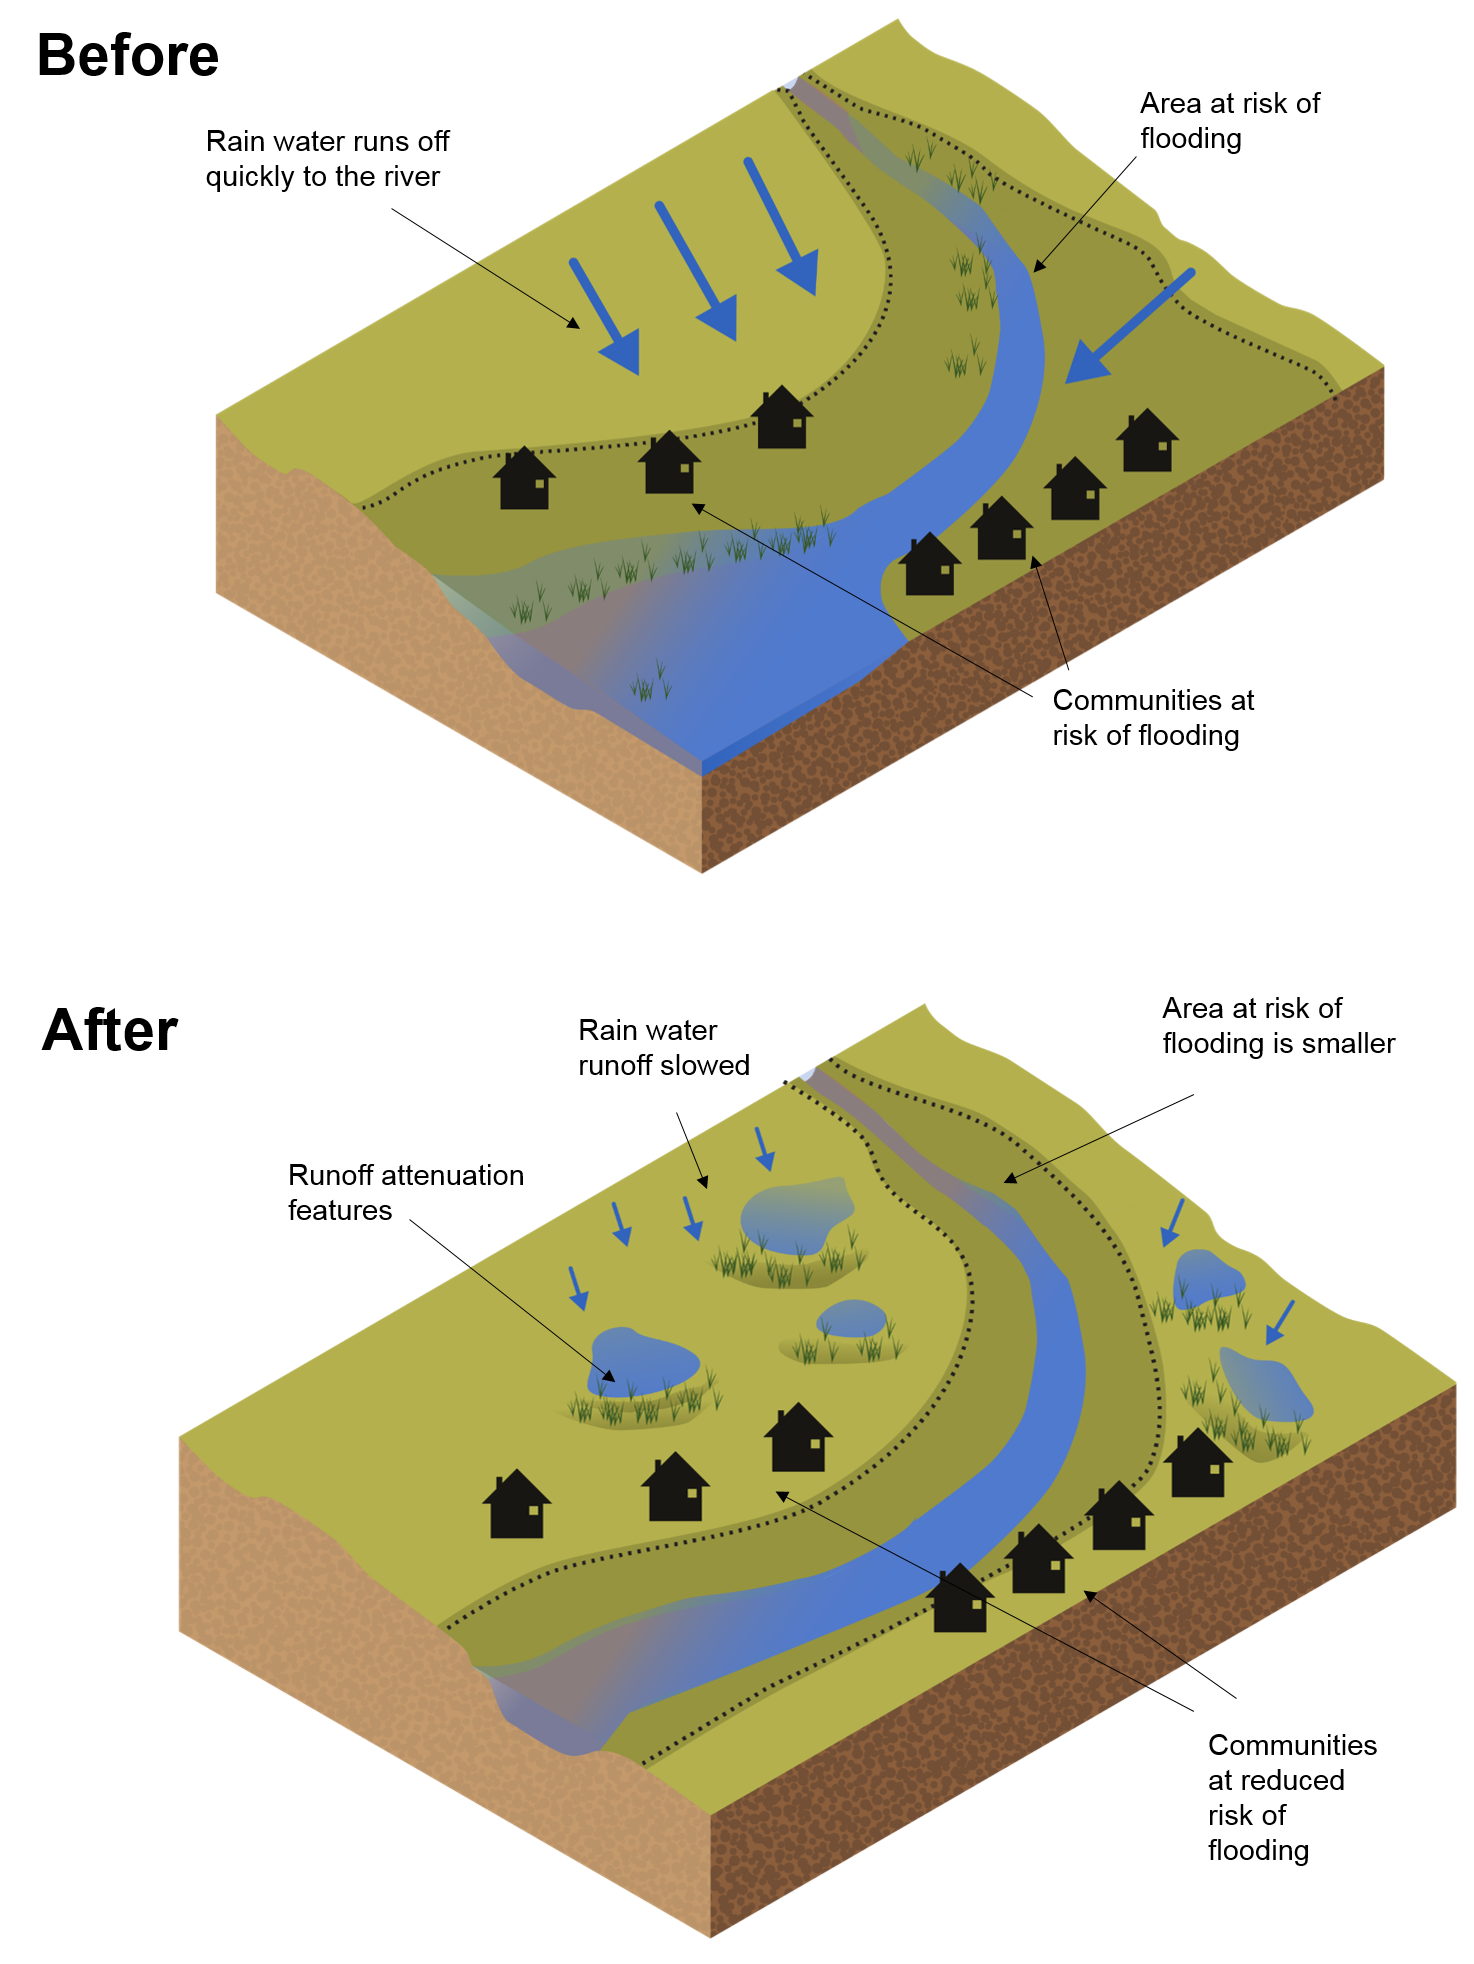 The before image shows how flooding happens without runoff attenuation. There is a large area of land with a river that flows from the top right to the bottom left of the image. To the left of the river there is a large area of open land showing that rainfall quickly runs off to the river. Along the river the image shows houses which represent communities at risk of flooding and the extent the flooding might reach. The after image shows how runoff attenuation features. There is a large area of land with a river that flows from the top right to the bottom left of the image. To the left of the river there is a large area of open land containing small to medium sized storage areas such as ponds.  Along the river there are houses which represent communities at risk of flooding and the extent the flooding might reach.